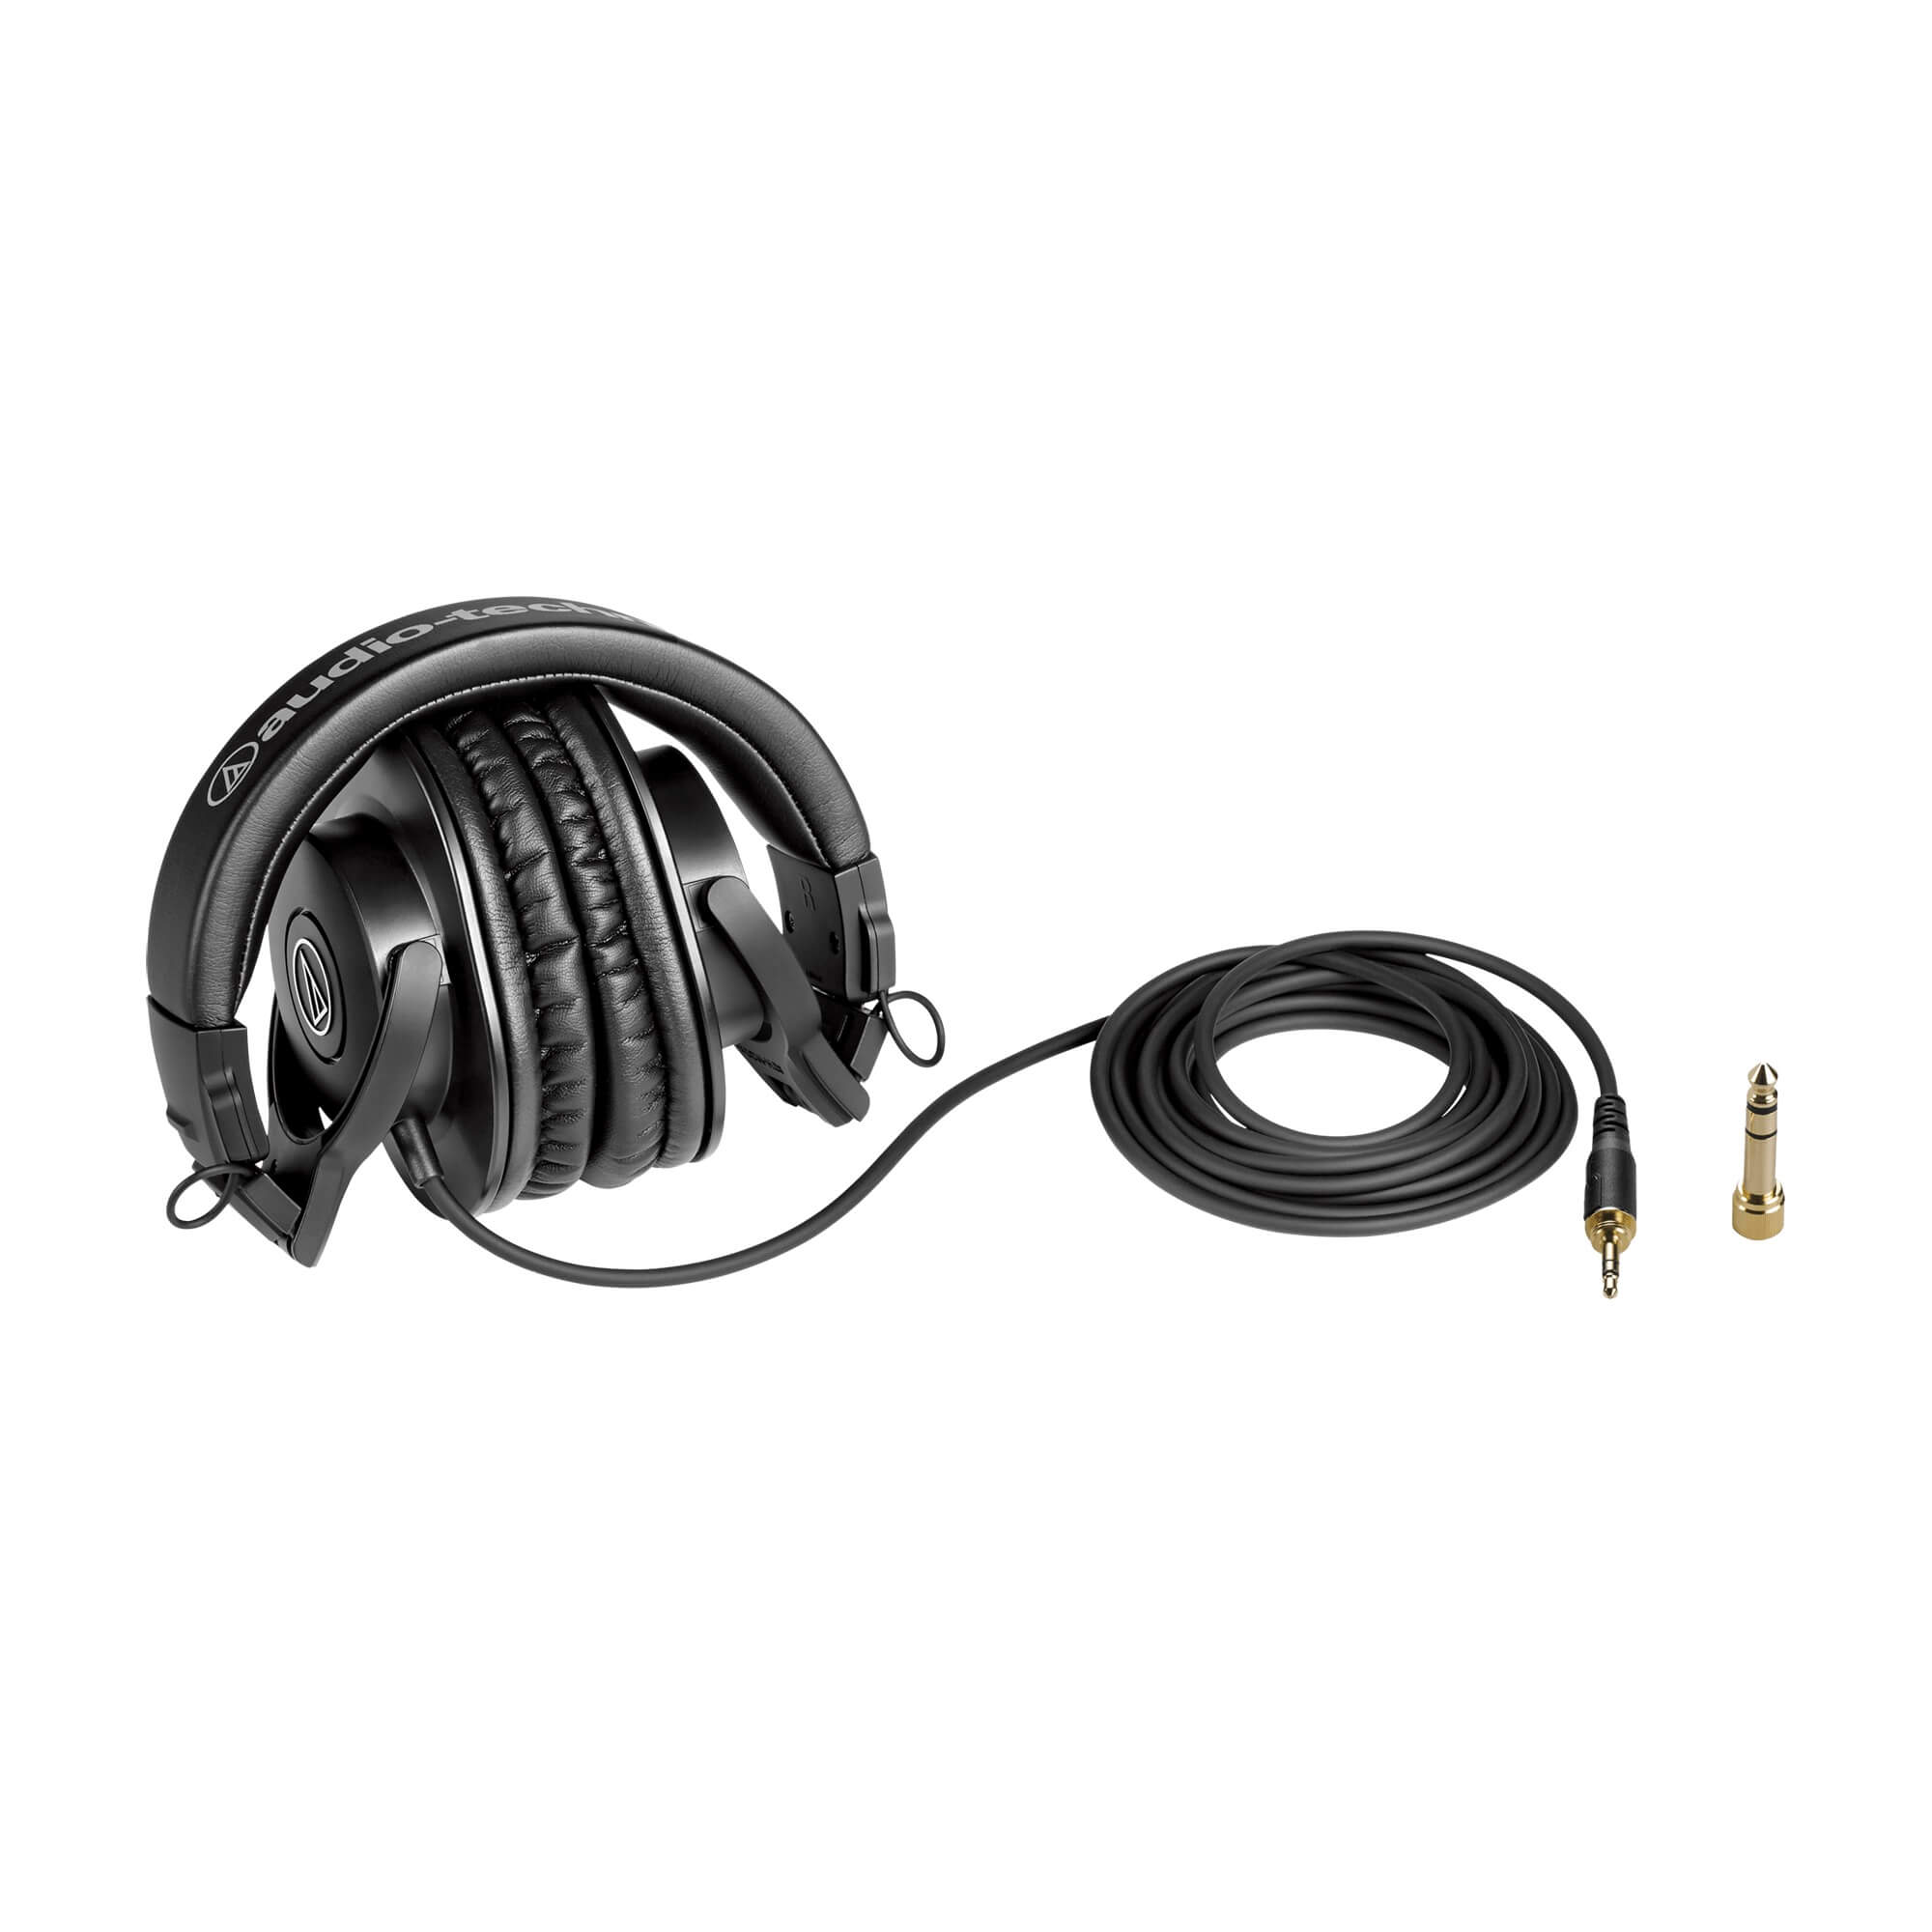 Audio-Technica ATH-M30x Professional Monitor Headphones with 1/4" adapter plug